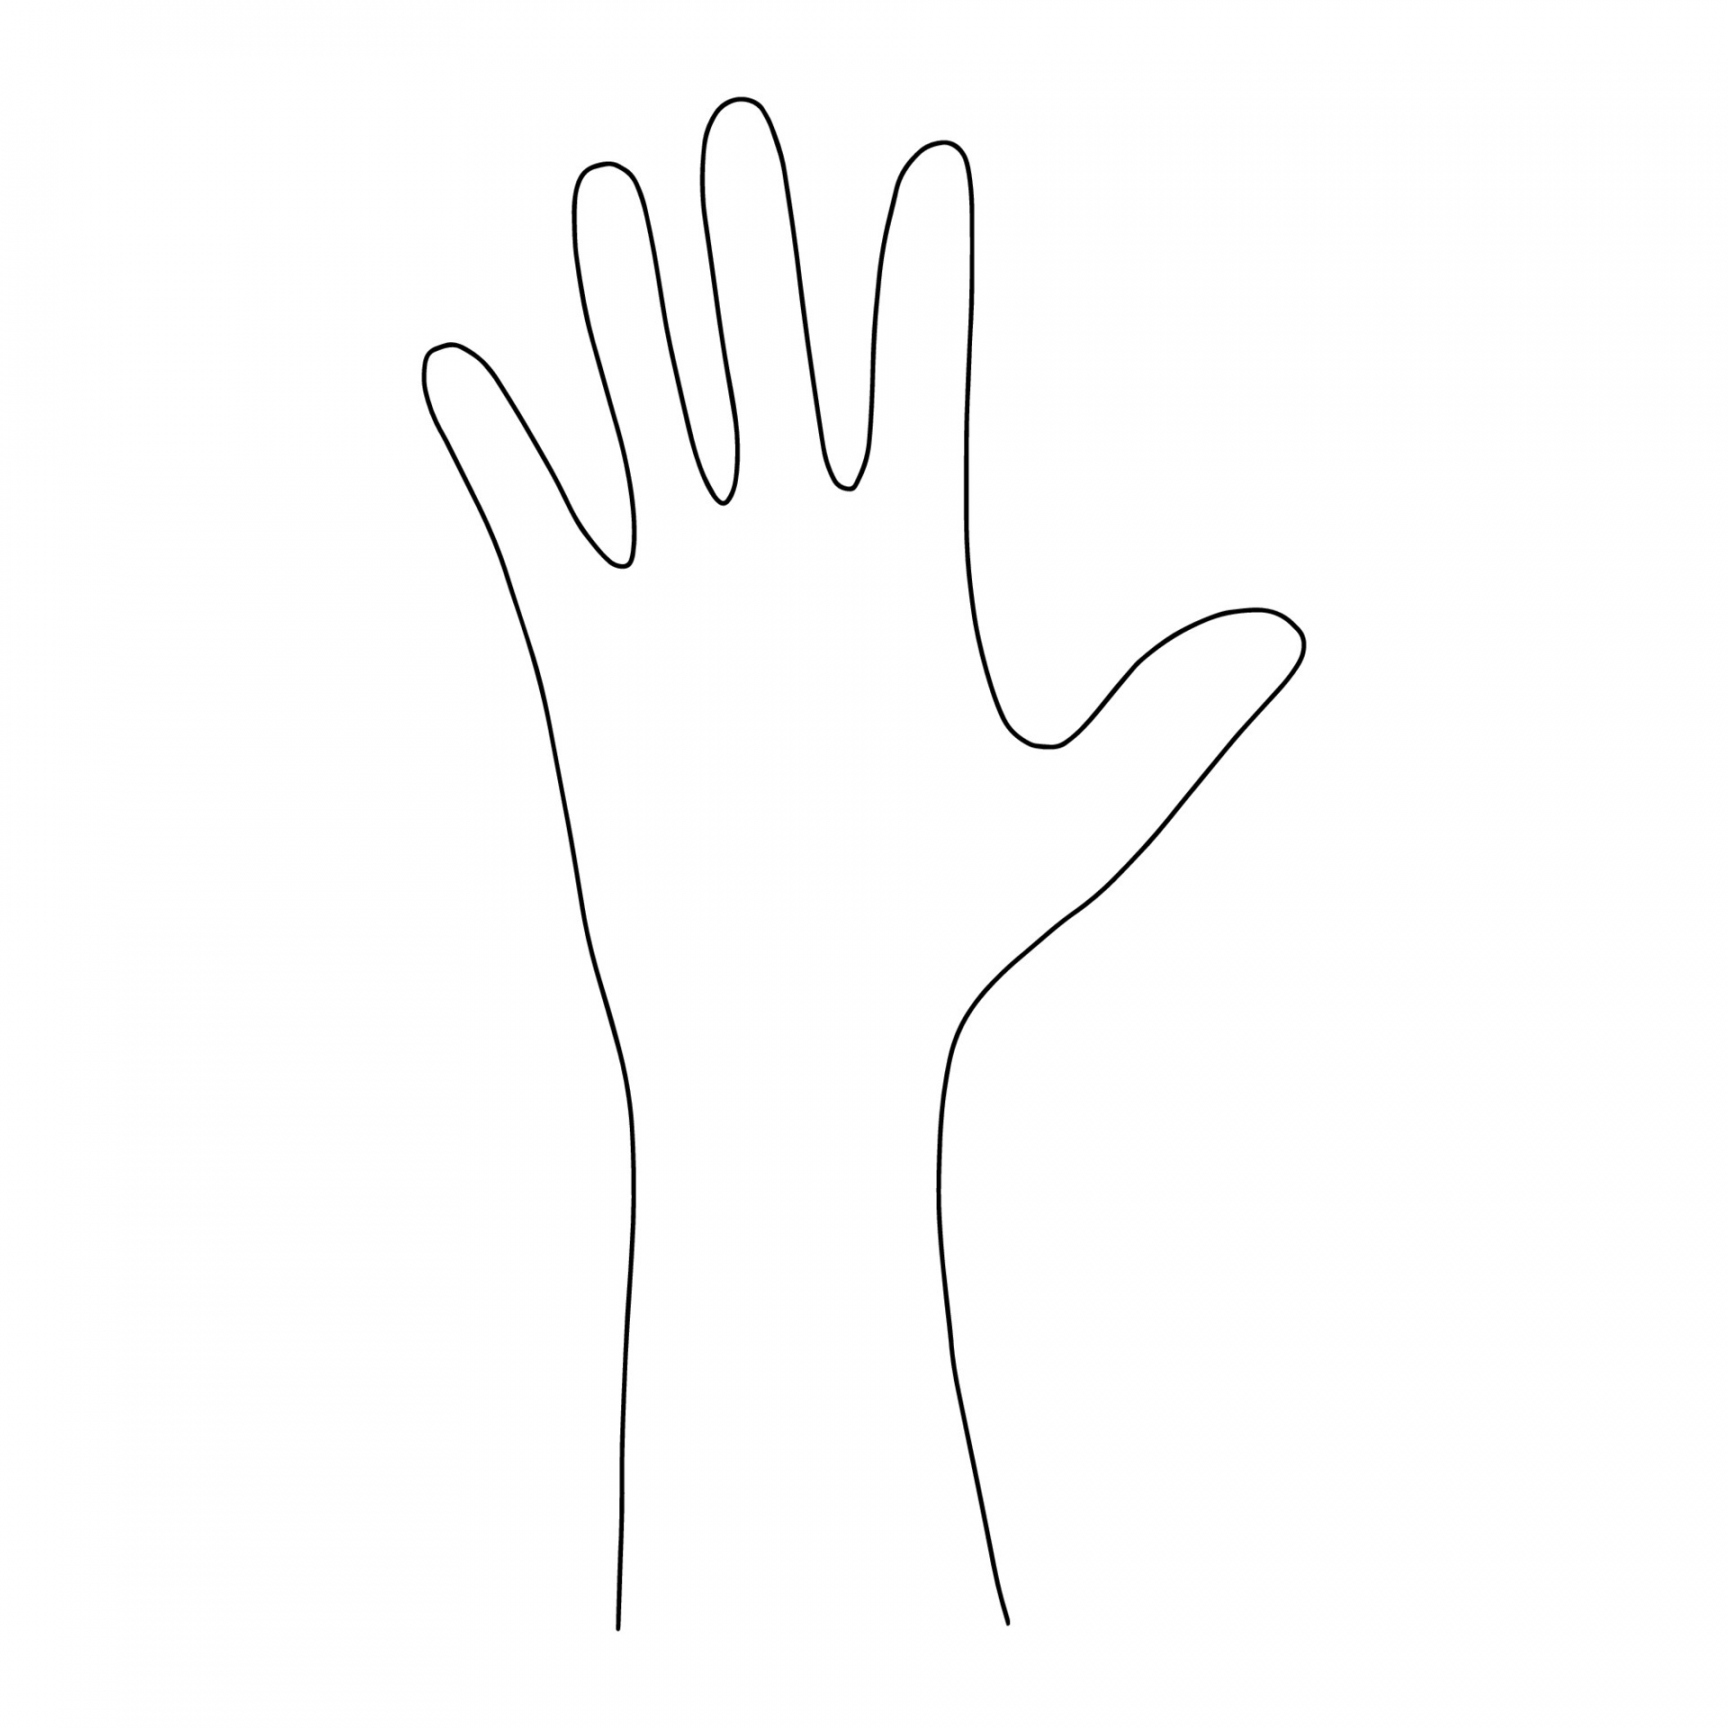 palm met open fingers.spread fingers.hand - Outline Of A Hand